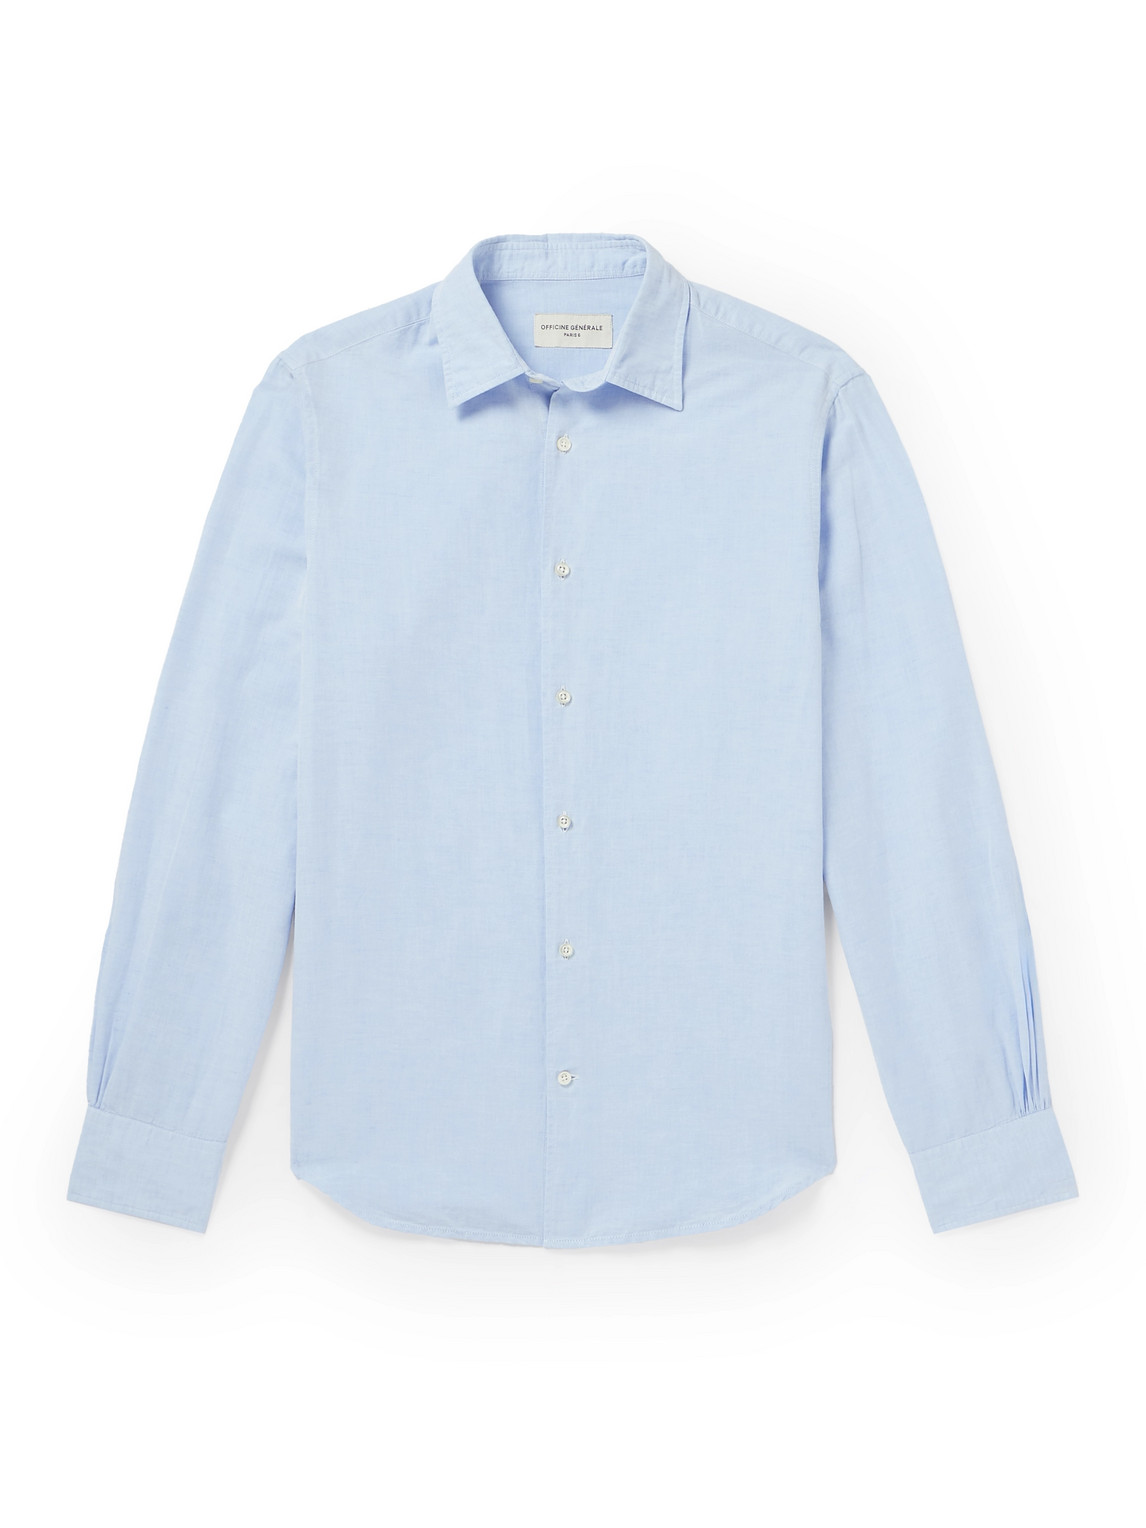 Officine Generale Giacomo Cotton And Linen-blend Shirt In Blue